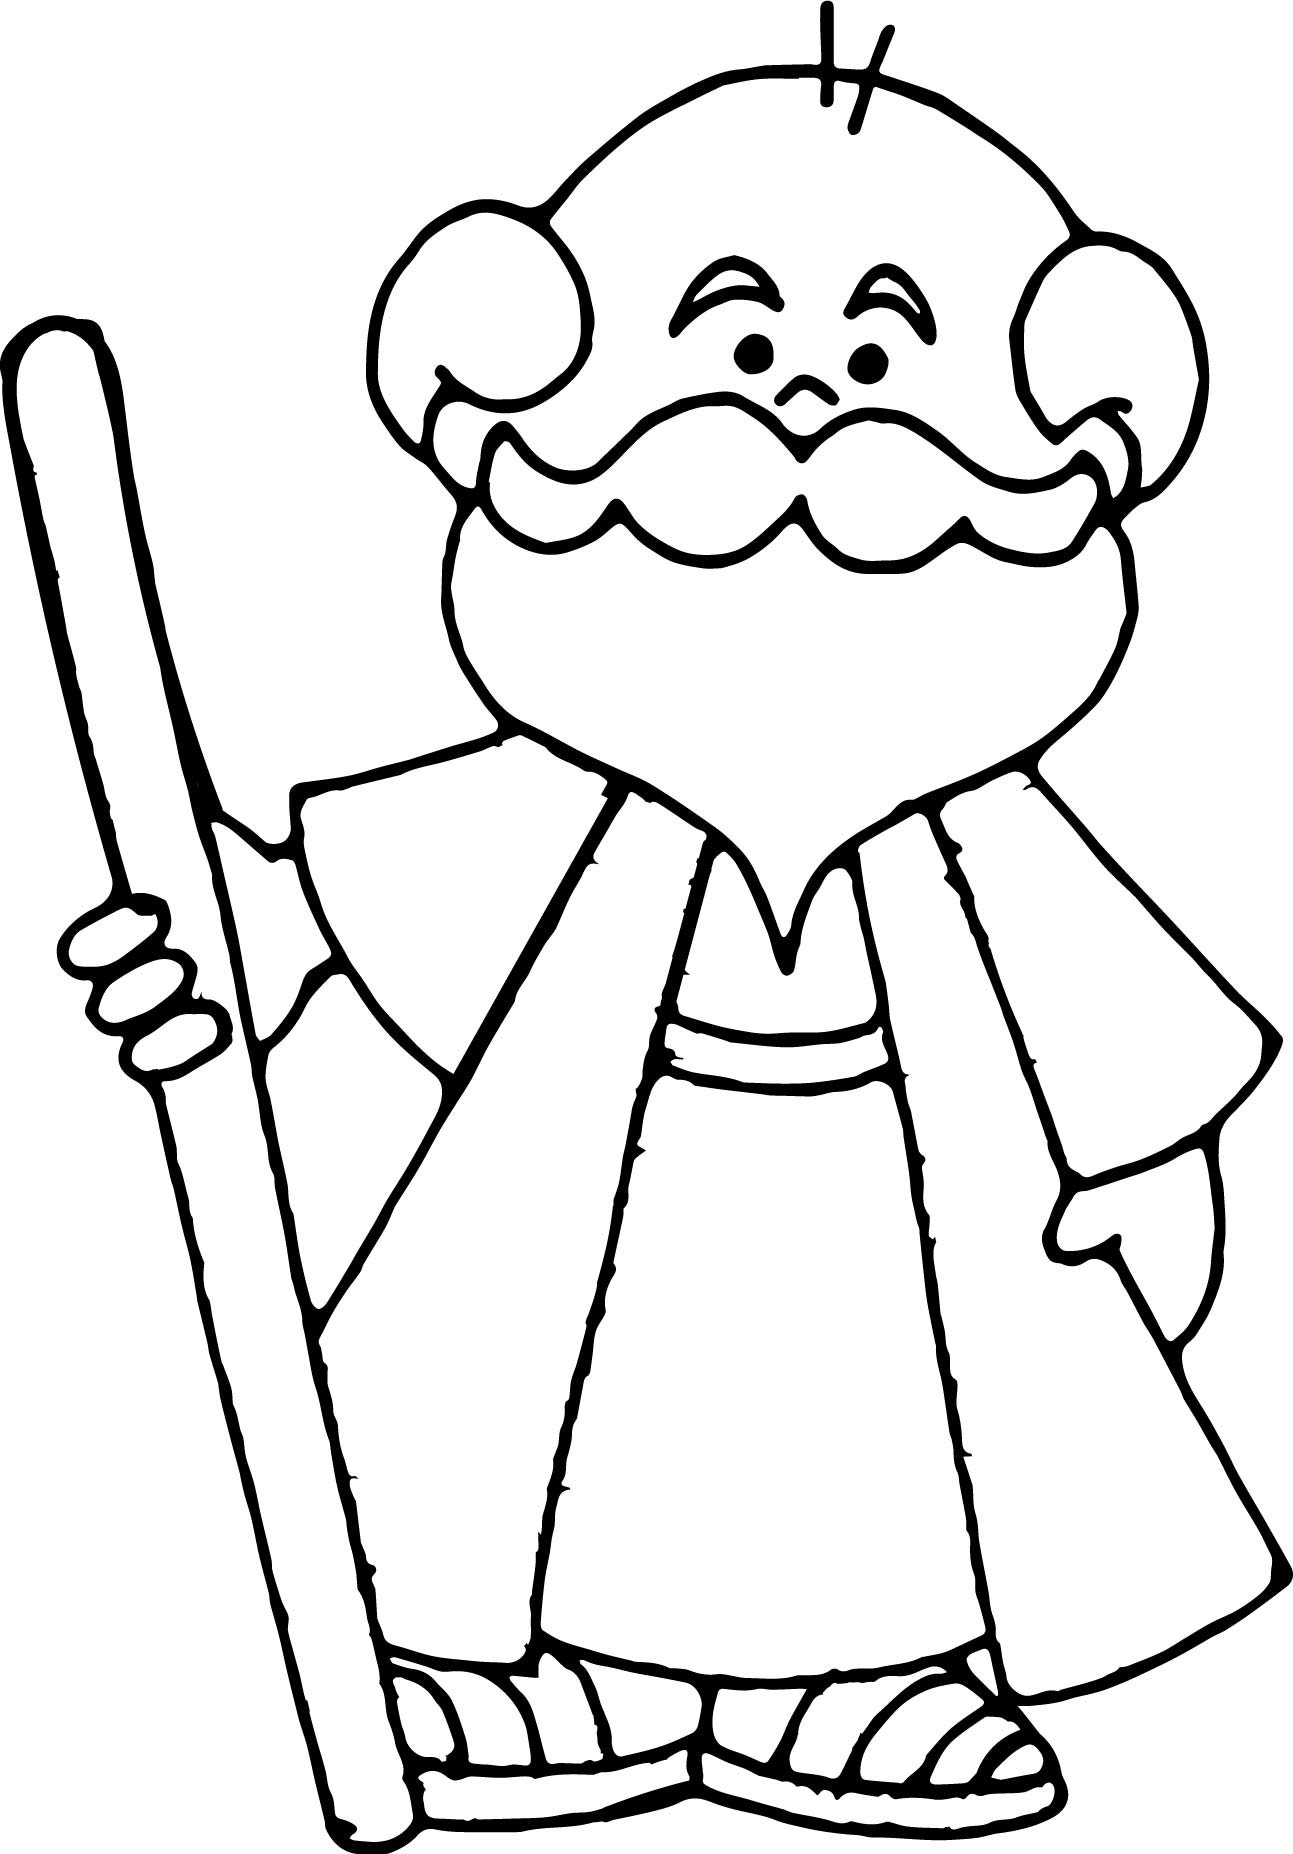 Abraham And Sarah Coloring Pages at GetDrawings Free download